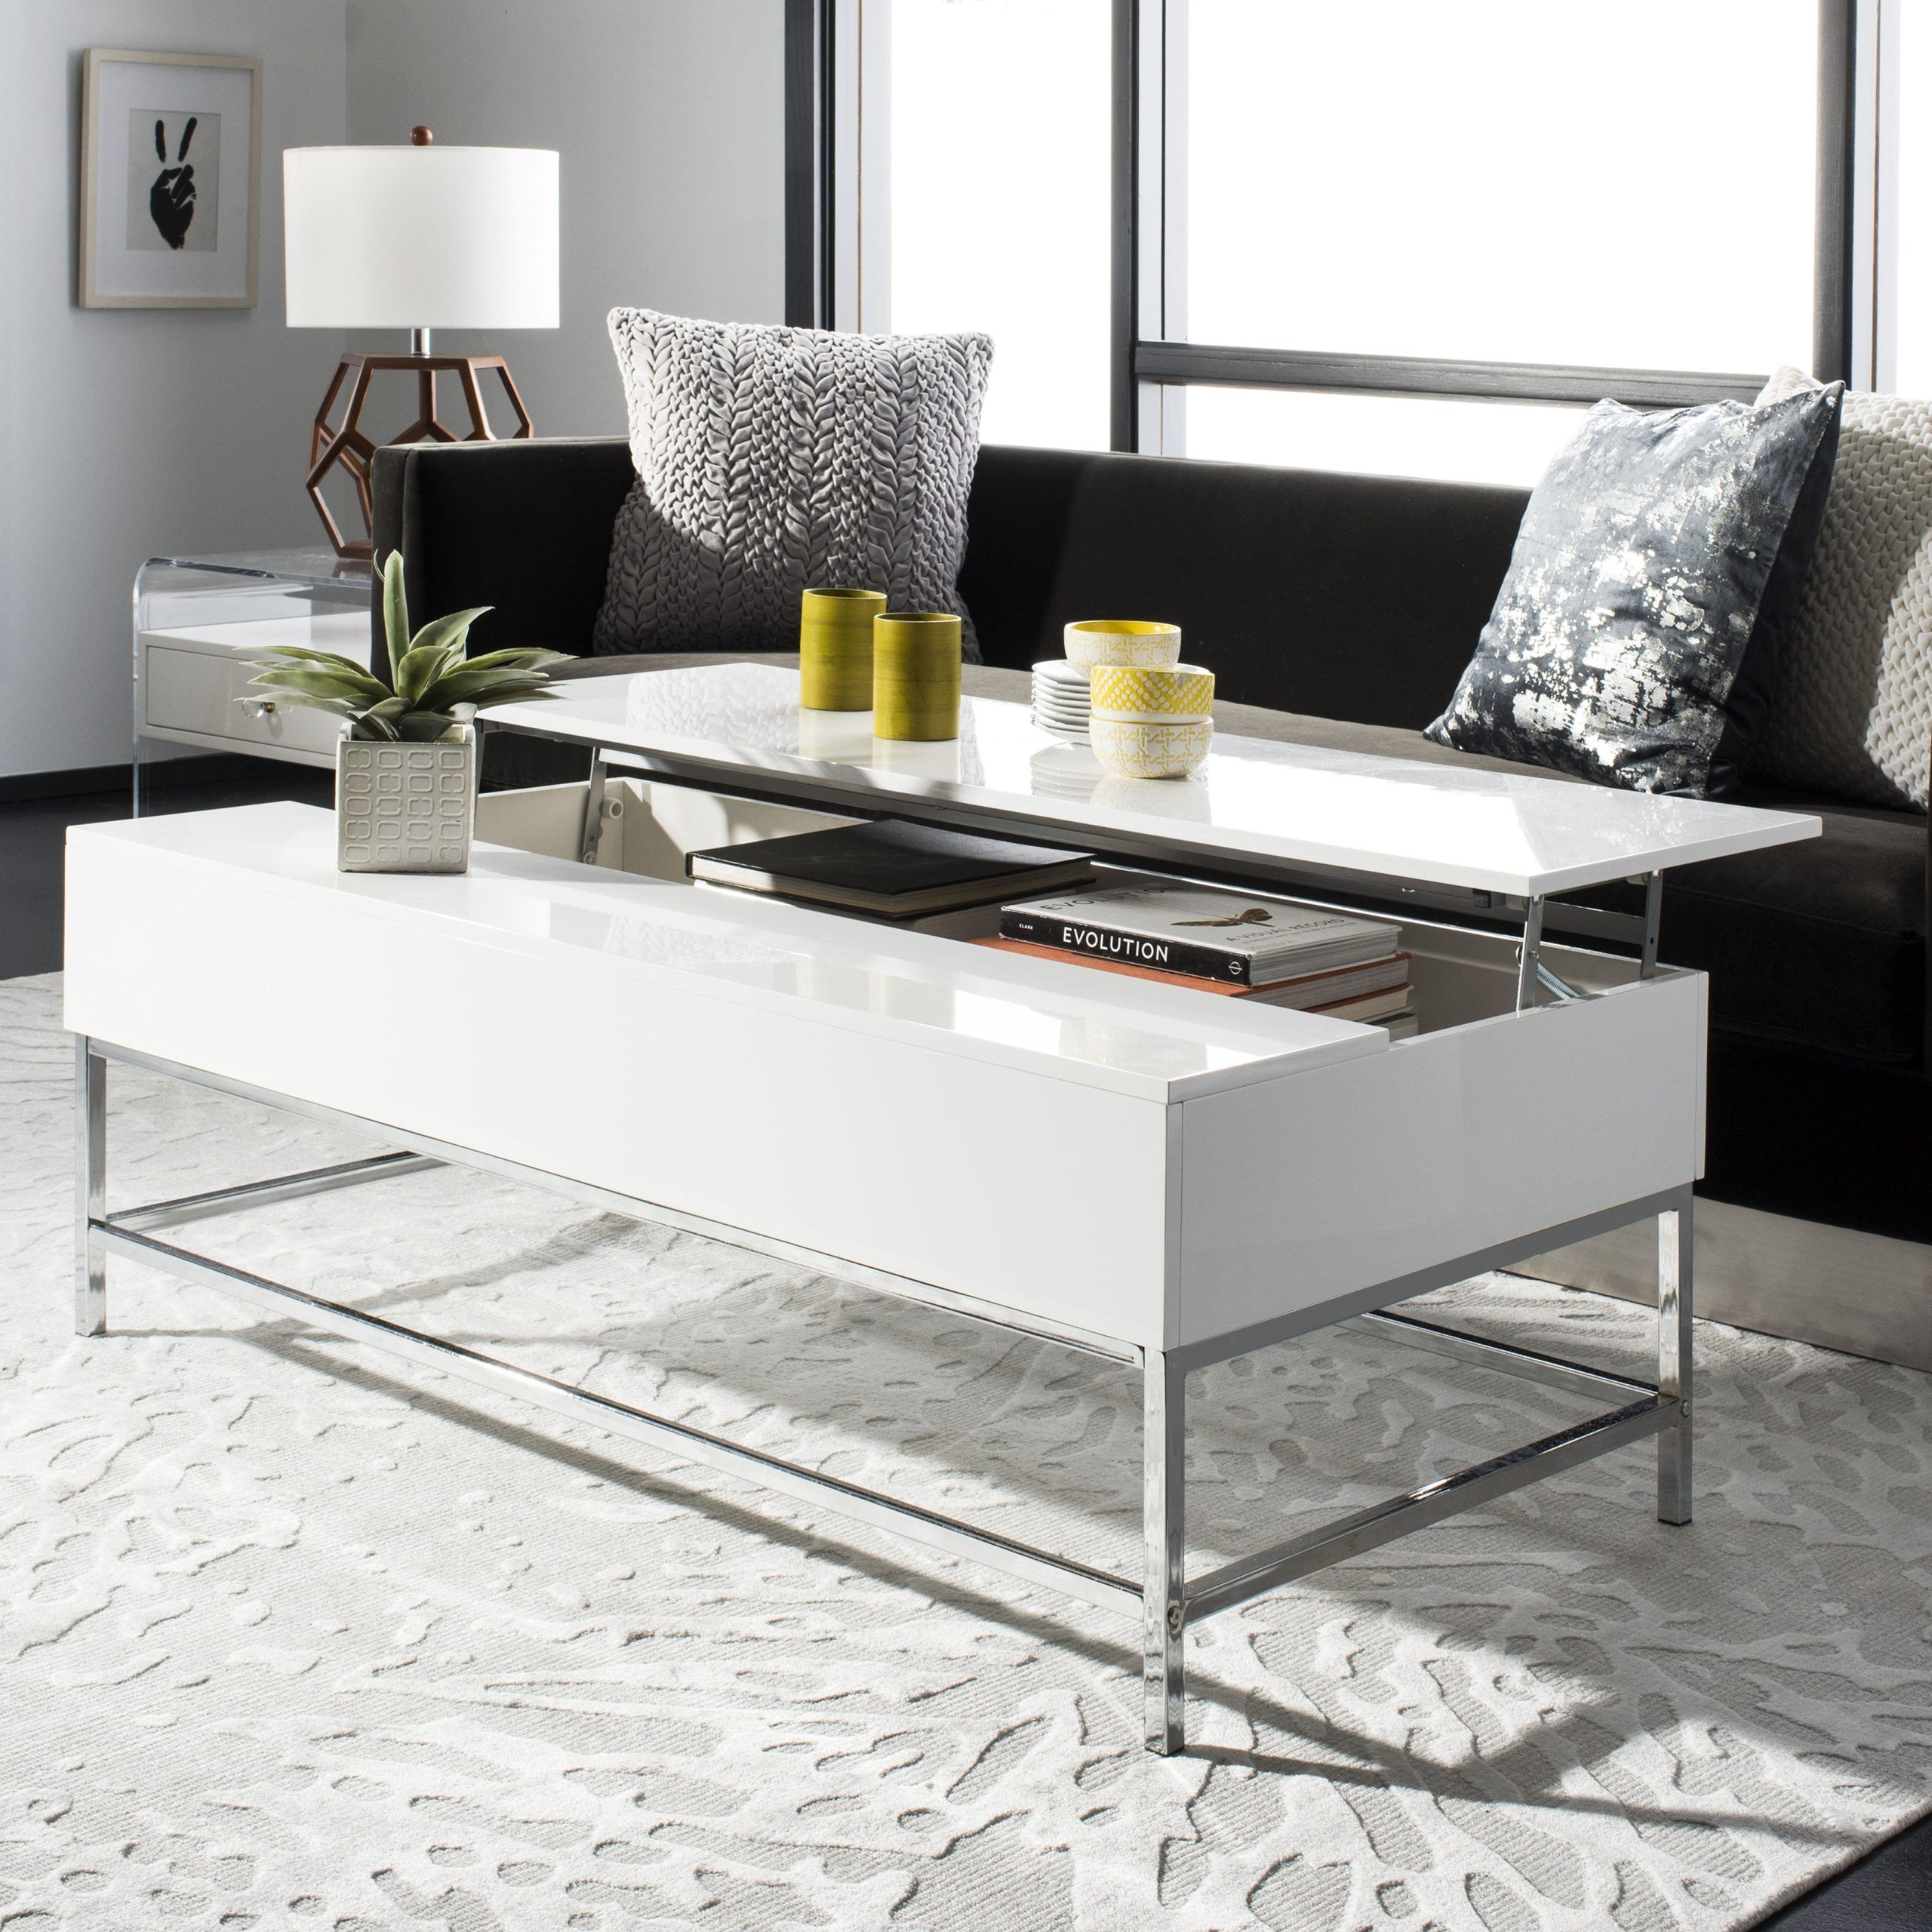 Safavieh Carolina Contemporary Lift Top Coffee Table, White Lacquer Regarding High Gloss Lift Top Coffee Tables (Gallery 2 of 21)